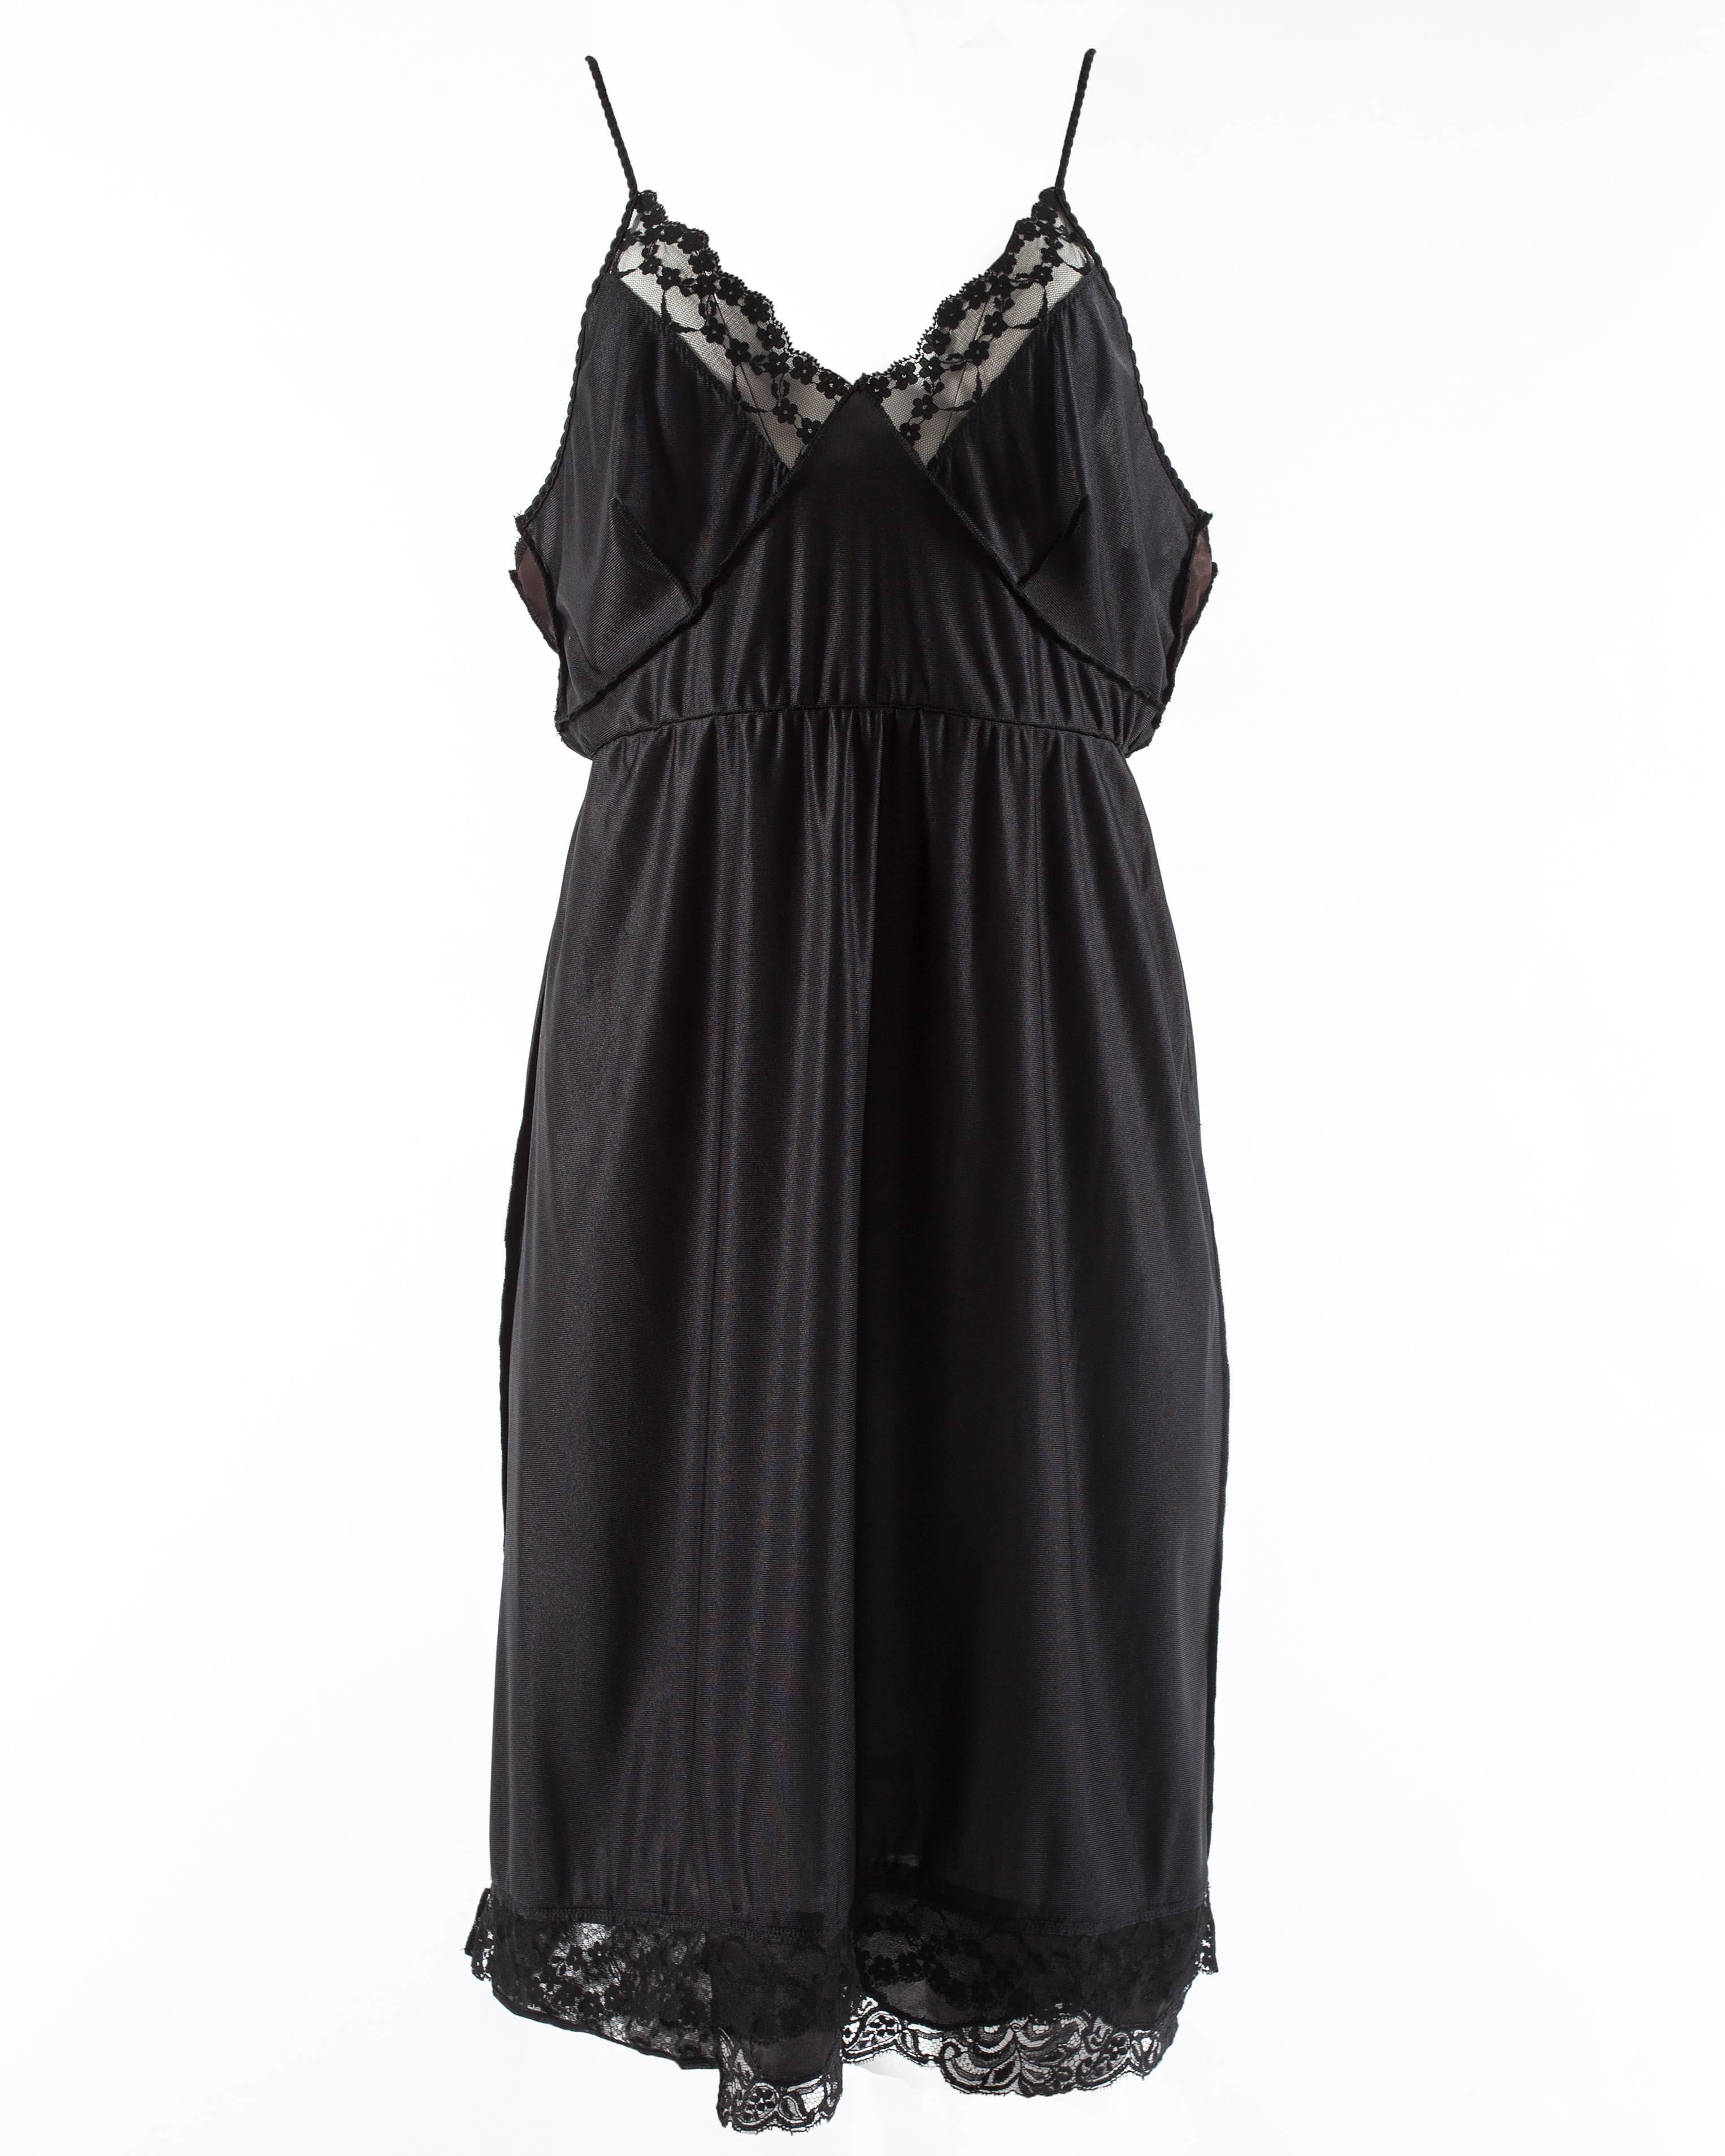 Martin Margiela black artisanal slip dress reconstructed into a skirt, ss 2003 In New Condition For Sale In London, GB